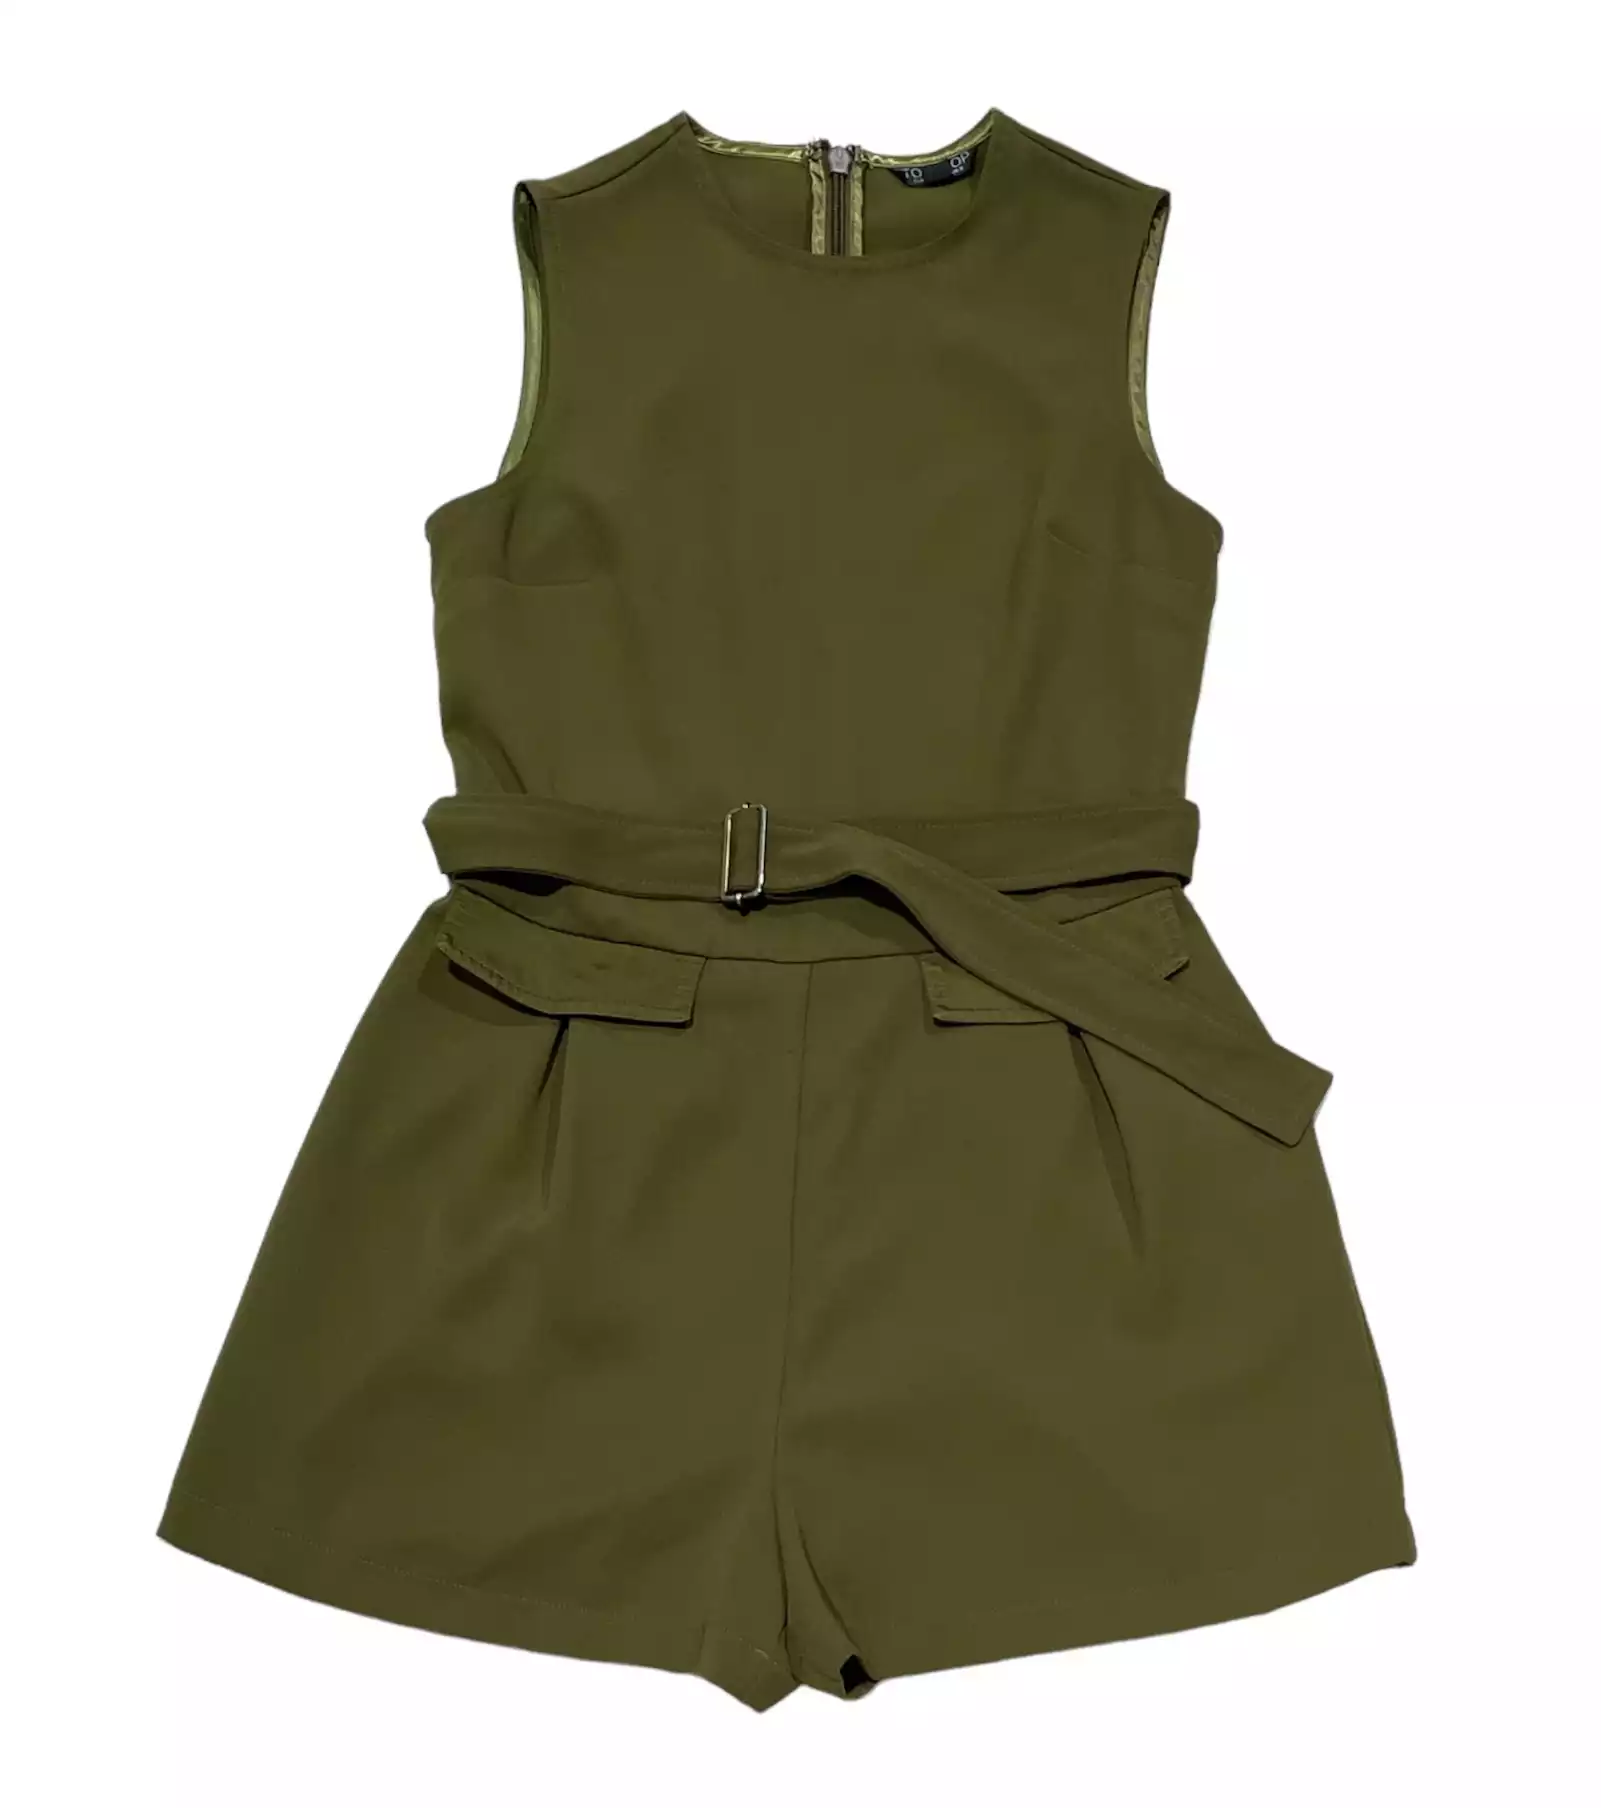 Playsuit by Topshop